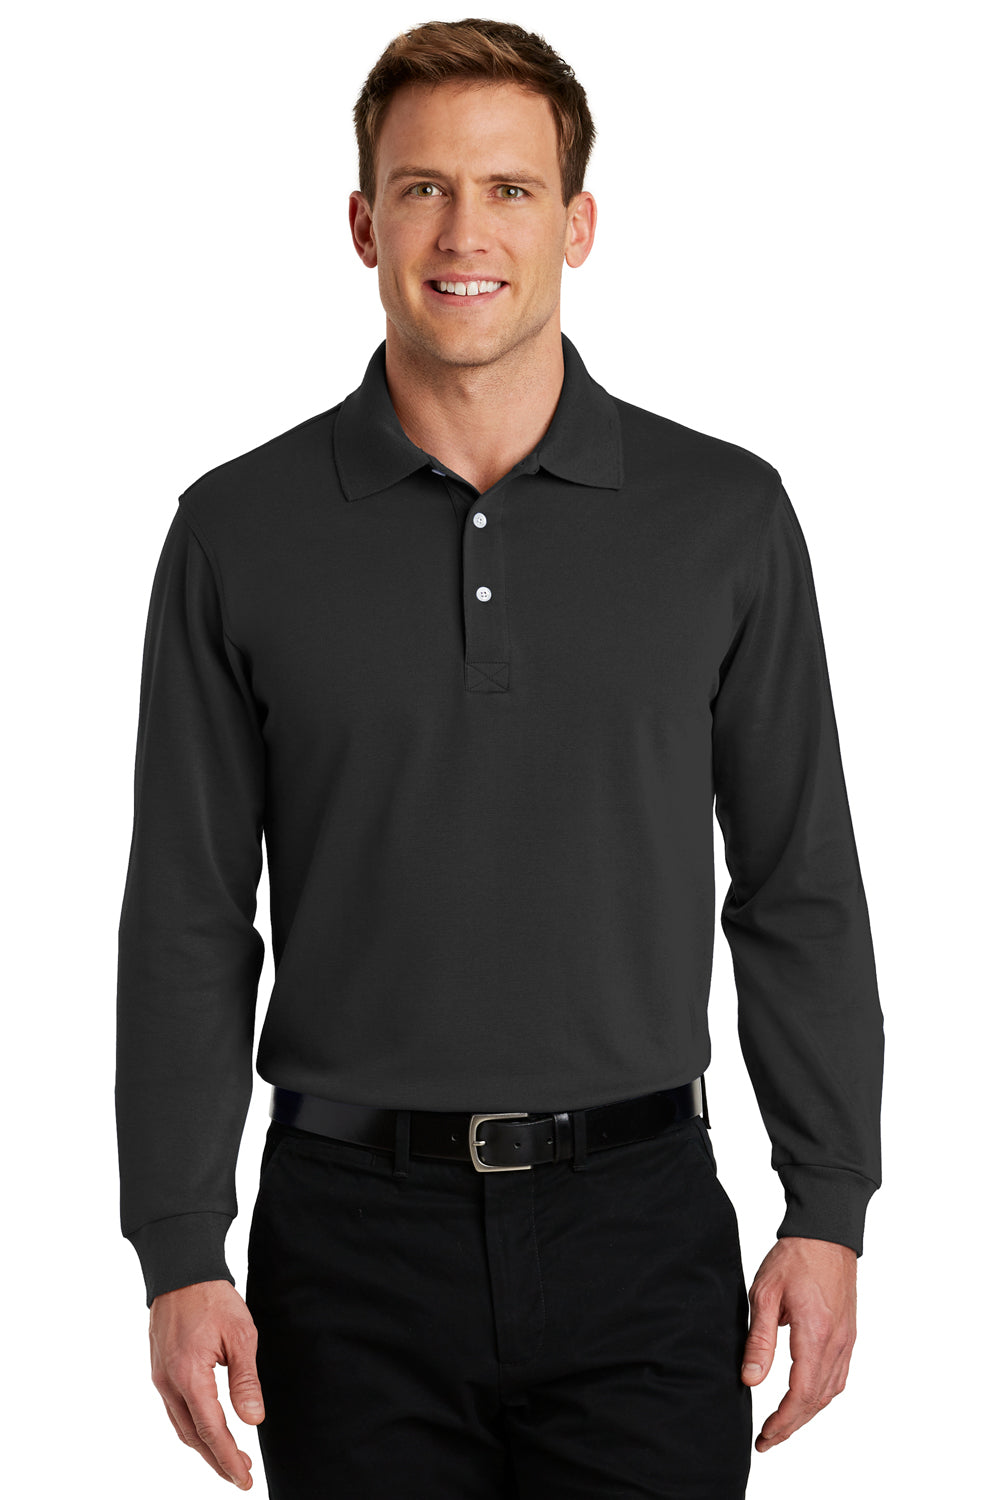 Port Authority K455LS Mens Rapid Dry Moisture Wicking Long Sleeve Polo Shirt Black Front